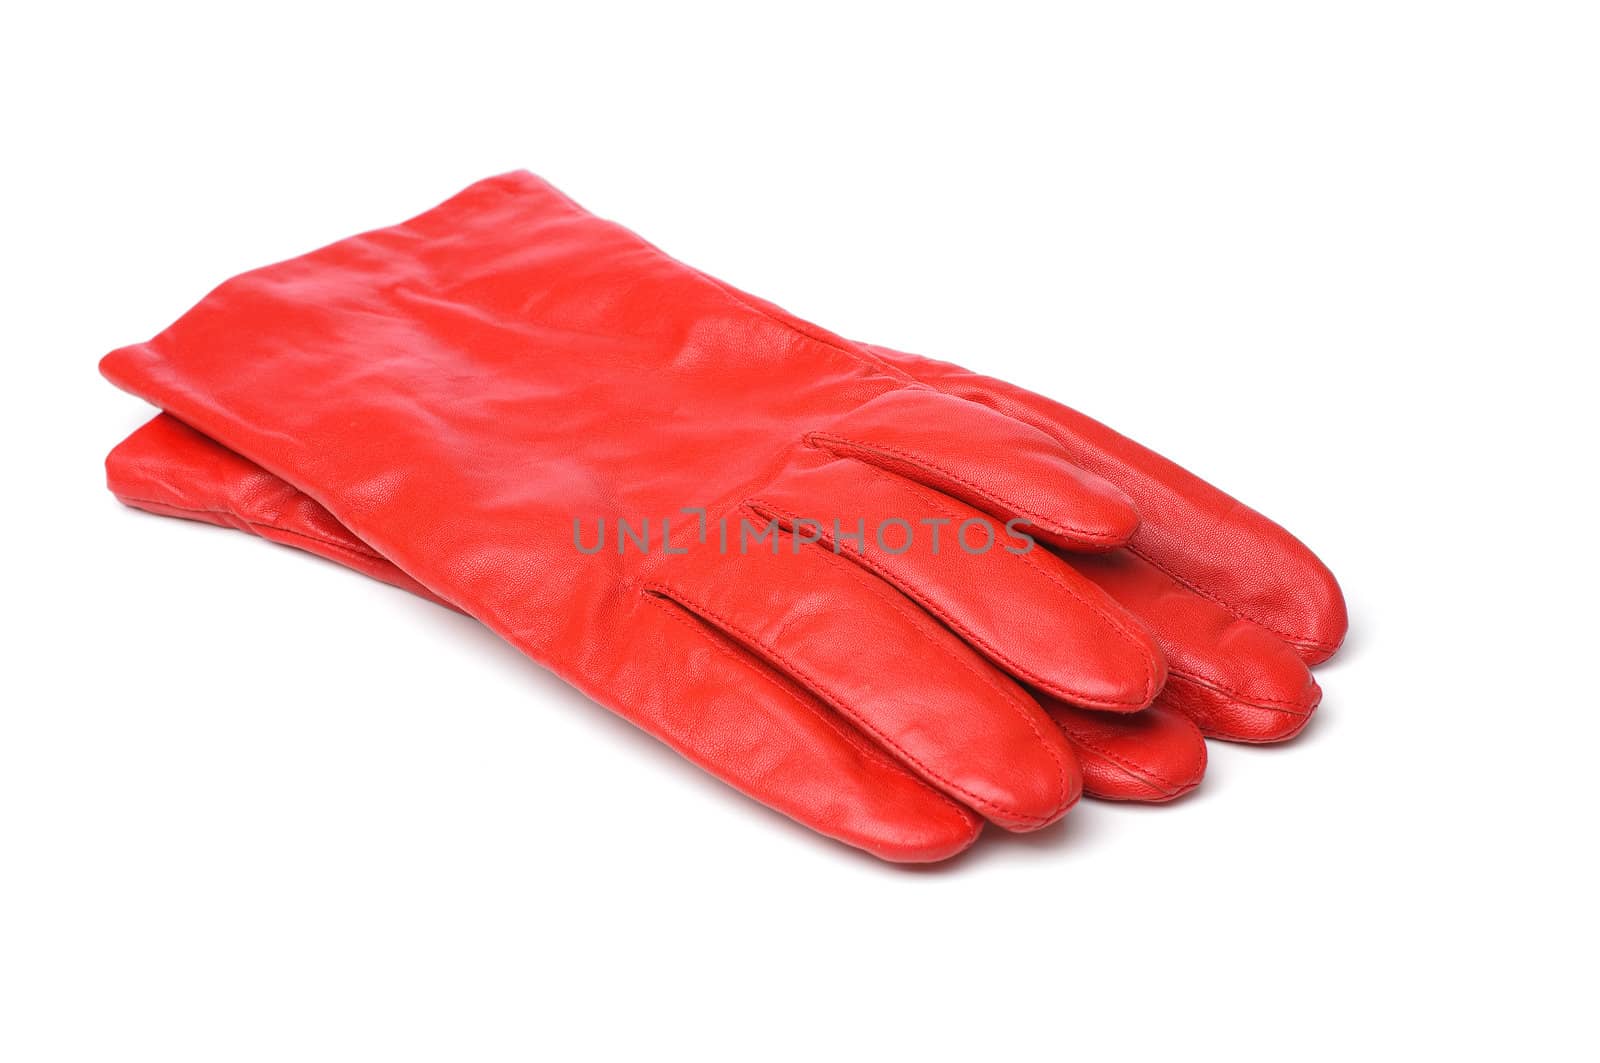 Red leather gloves by Shane9